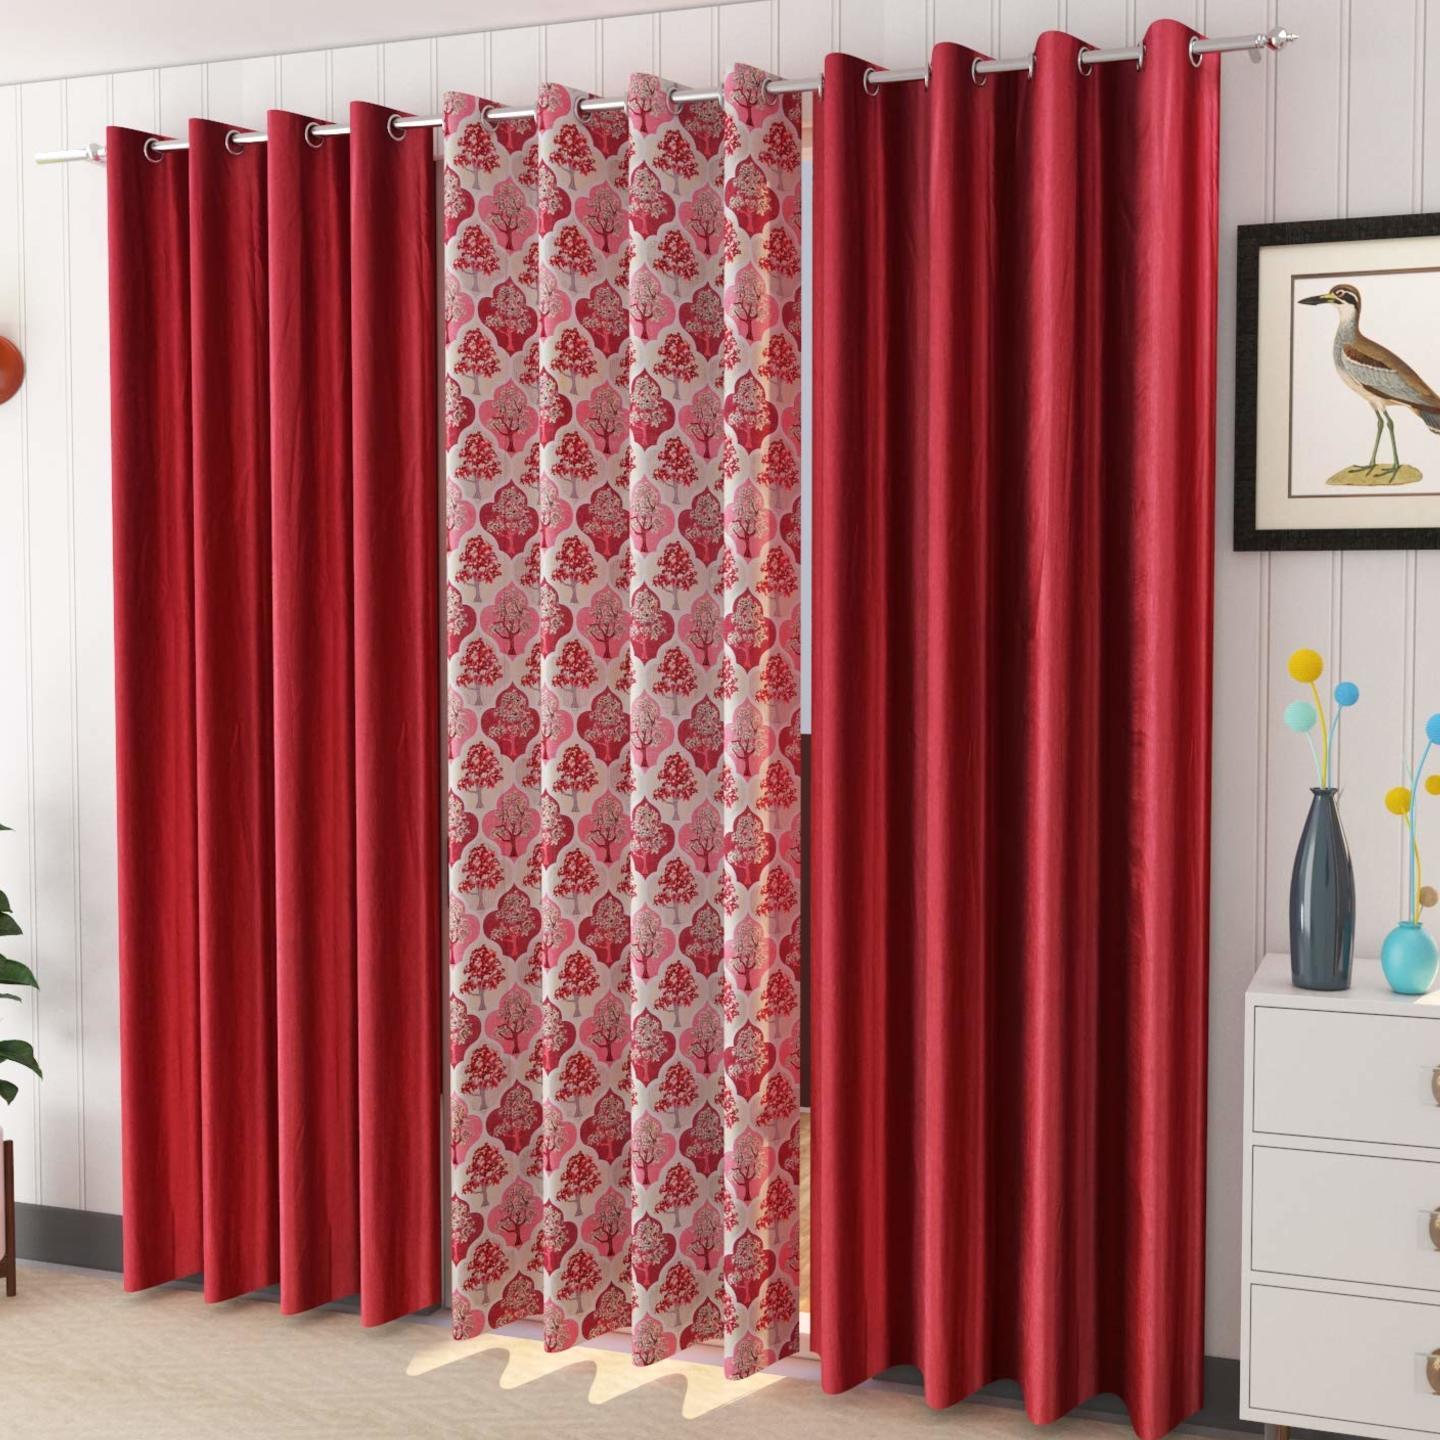 Handtex Home Curtains Polyester Tree Printed Set of 3 Pcs Maroon (1Tree+2Plain) Size for Long Door 4 Feet x 7 Feet